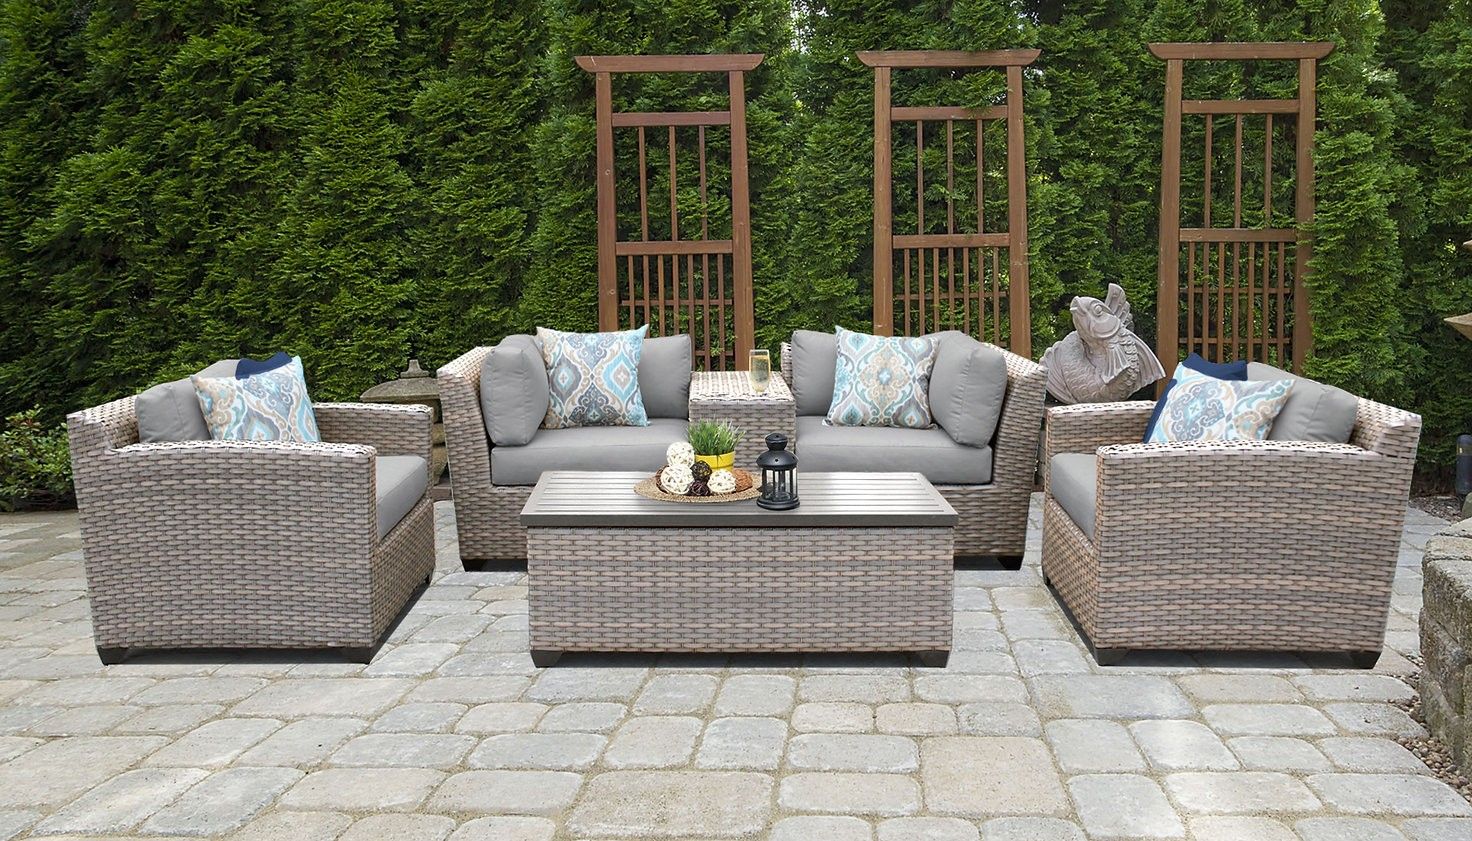 New Outdoor HDPE 6pc Patio Furniture Wicker Lounge Set